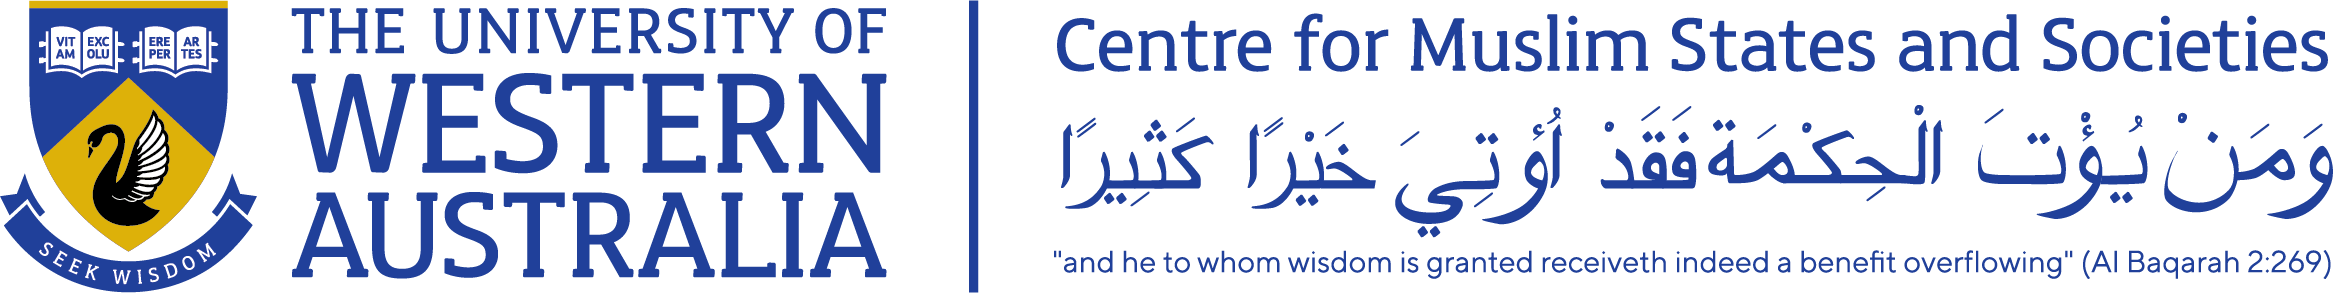 Centre for Muslim States and Societies logo